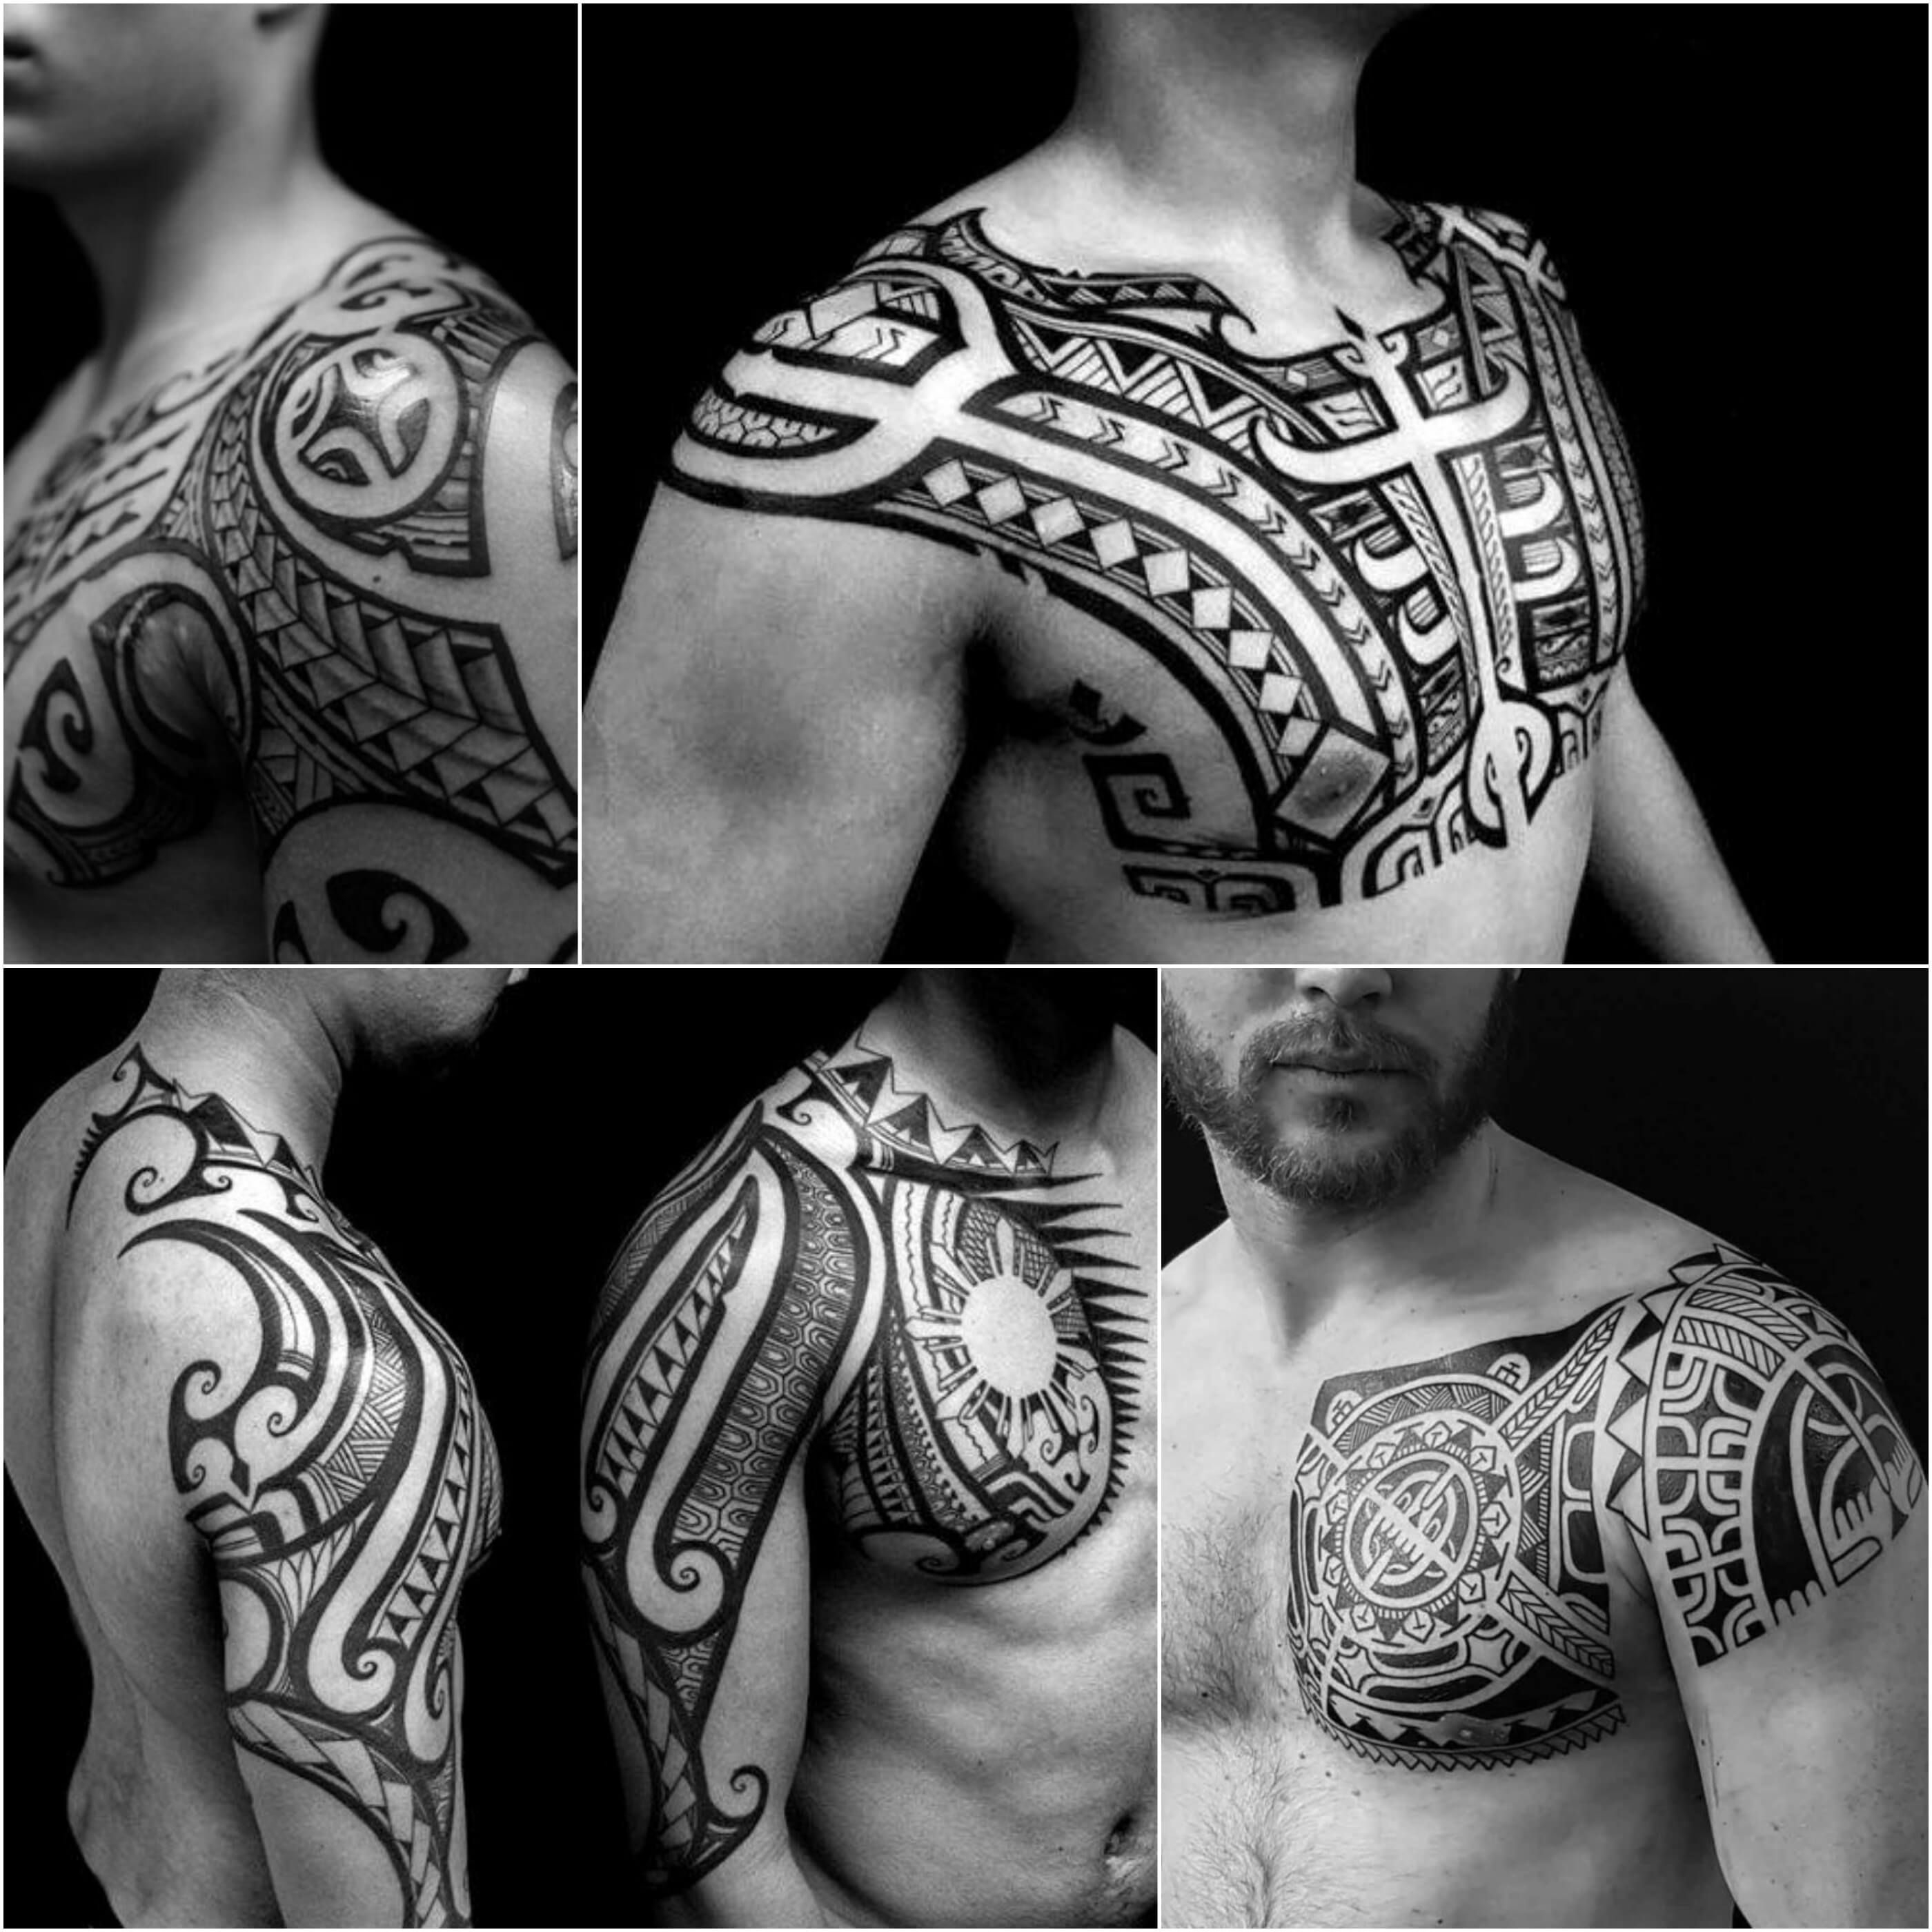 100 Best Chest Tattoos For Men Chest Tattoo Gallery For Men within sizing 2800 X 2800